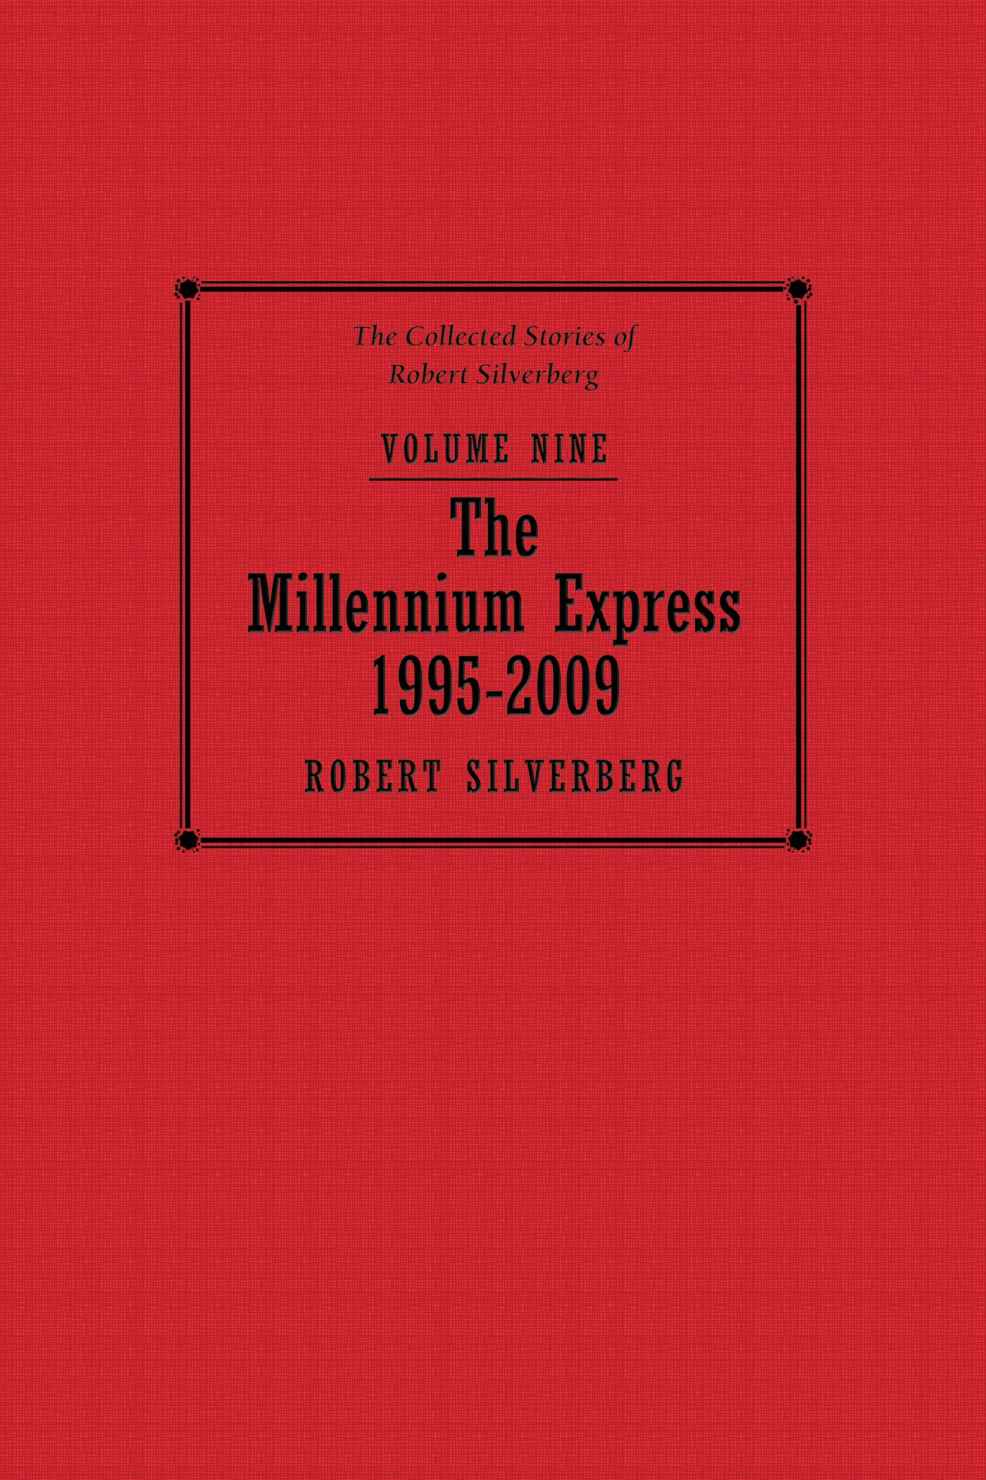 The Millennium Express: The Collected Stories